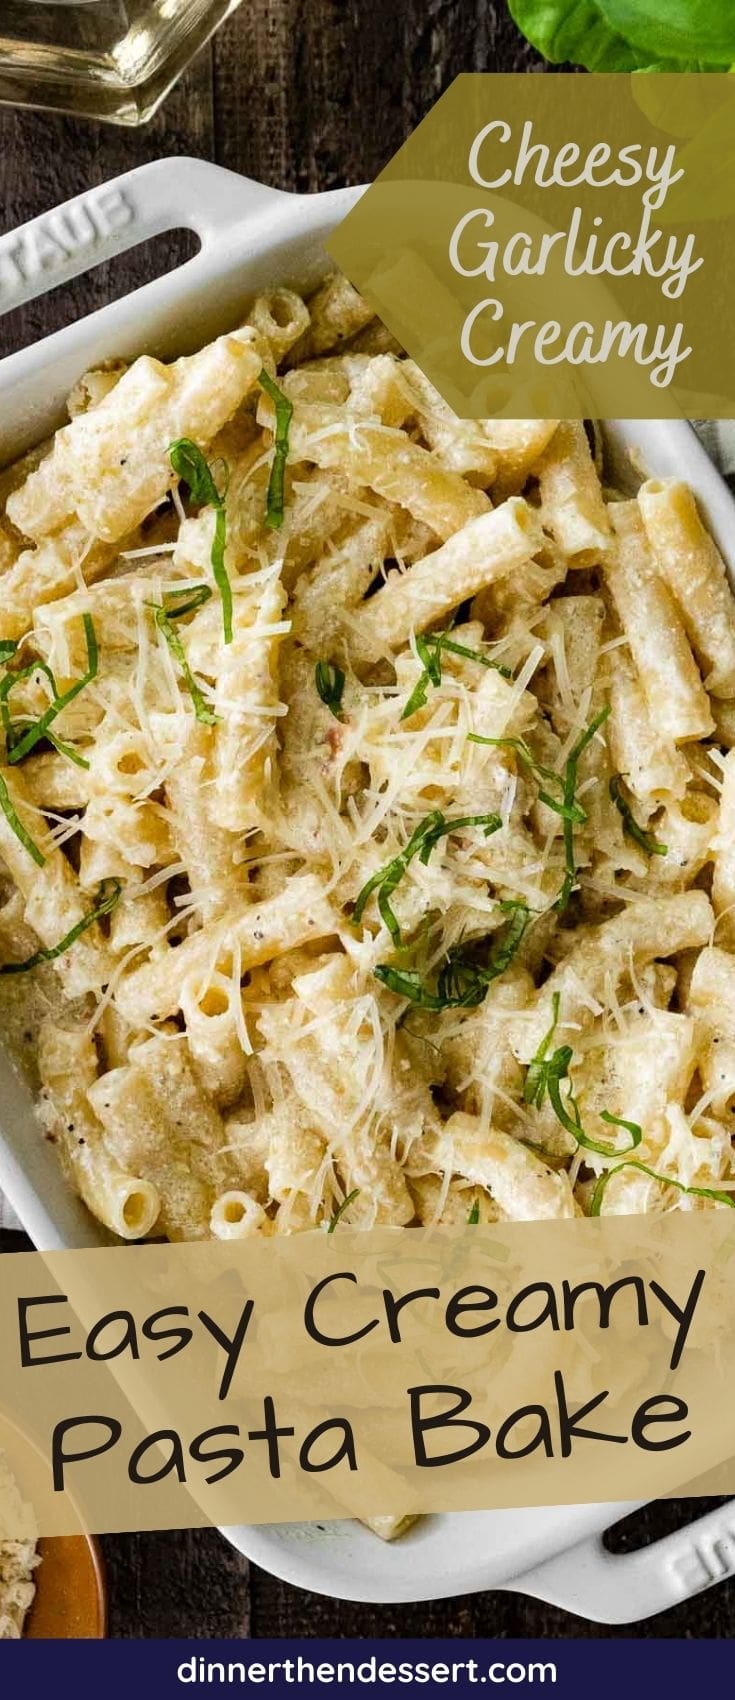 Creamy Pasta Bake finished pasta in baking dish with recipe name across the bottom